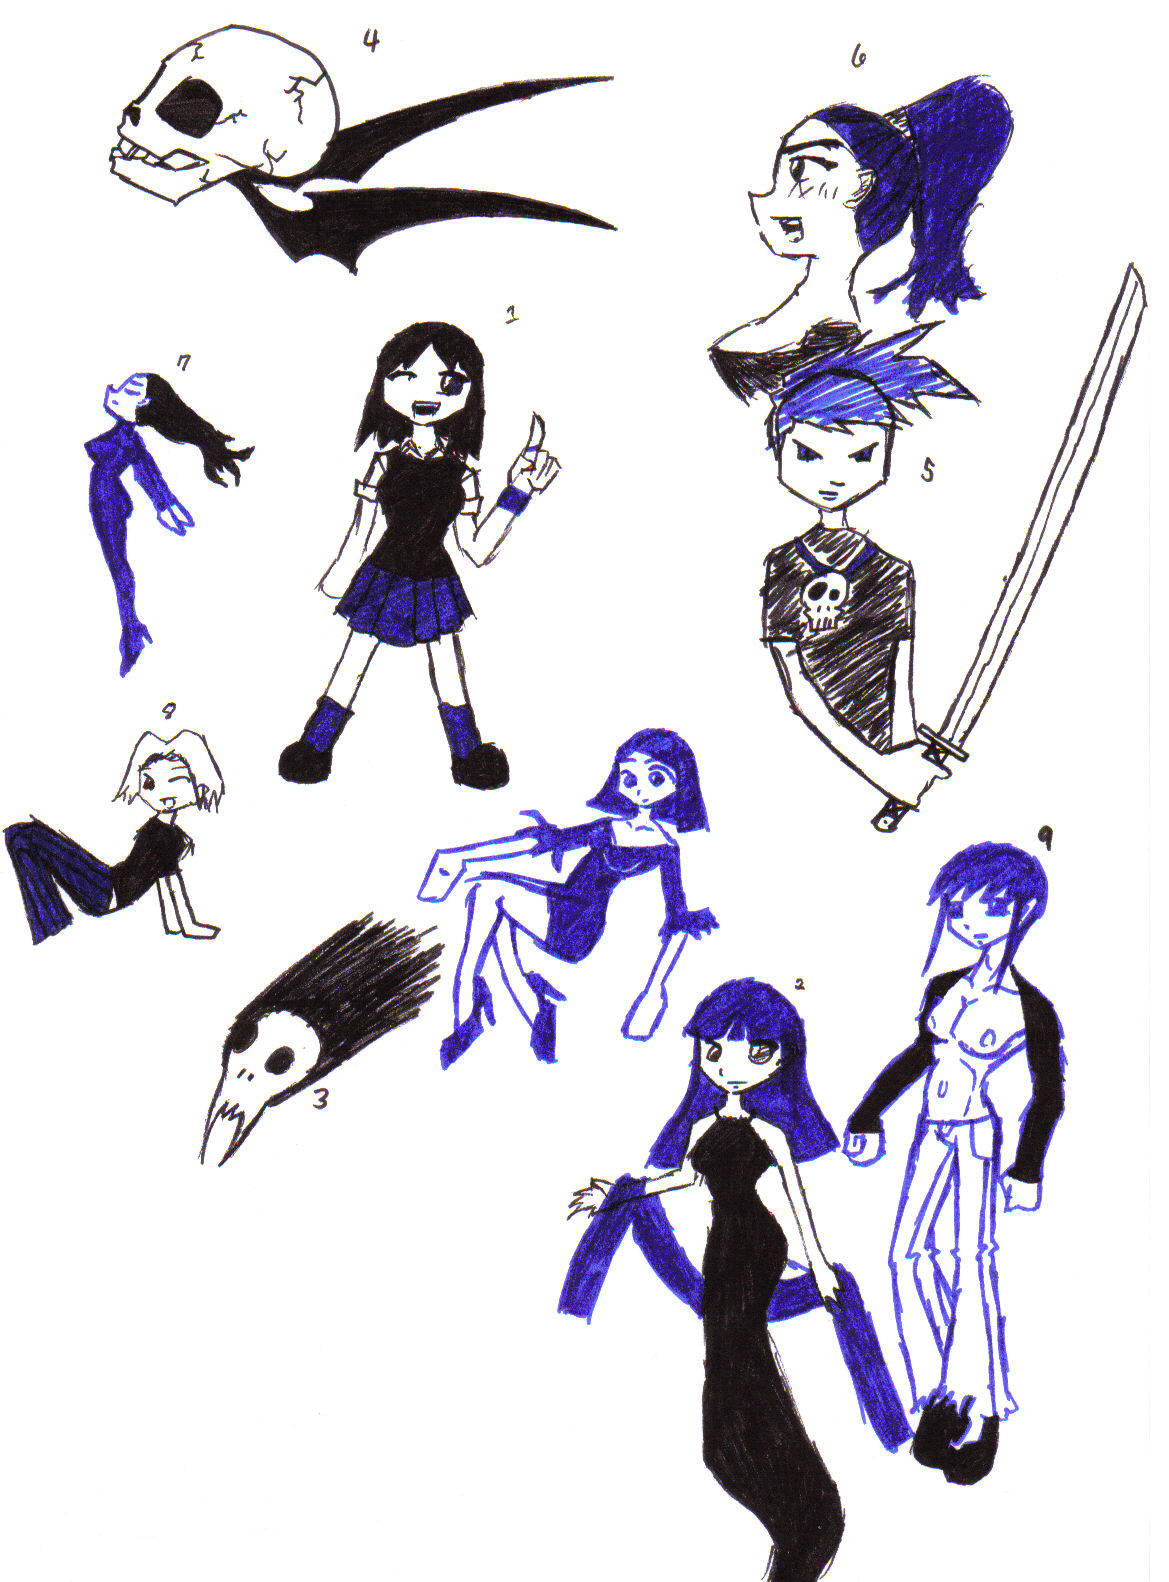 Bunch O' Sketches by Penguins_luv_LSD